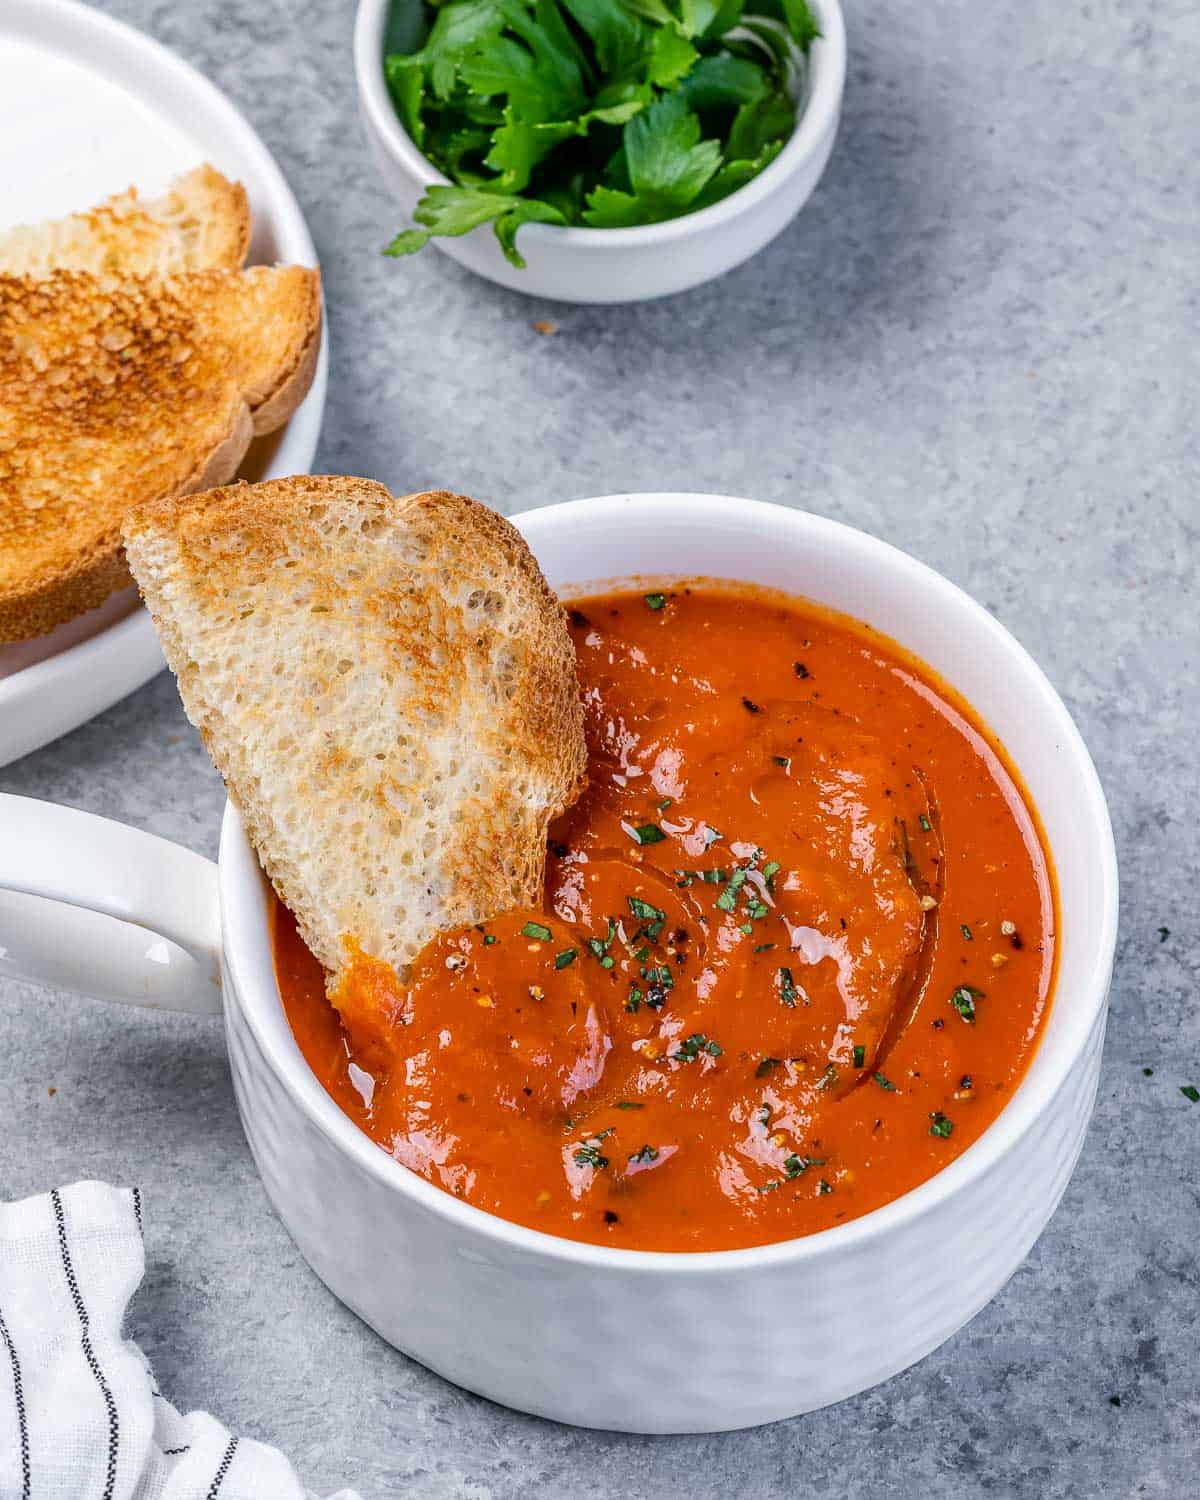 Piece of toast in a bowl of roasted red pepper soup.